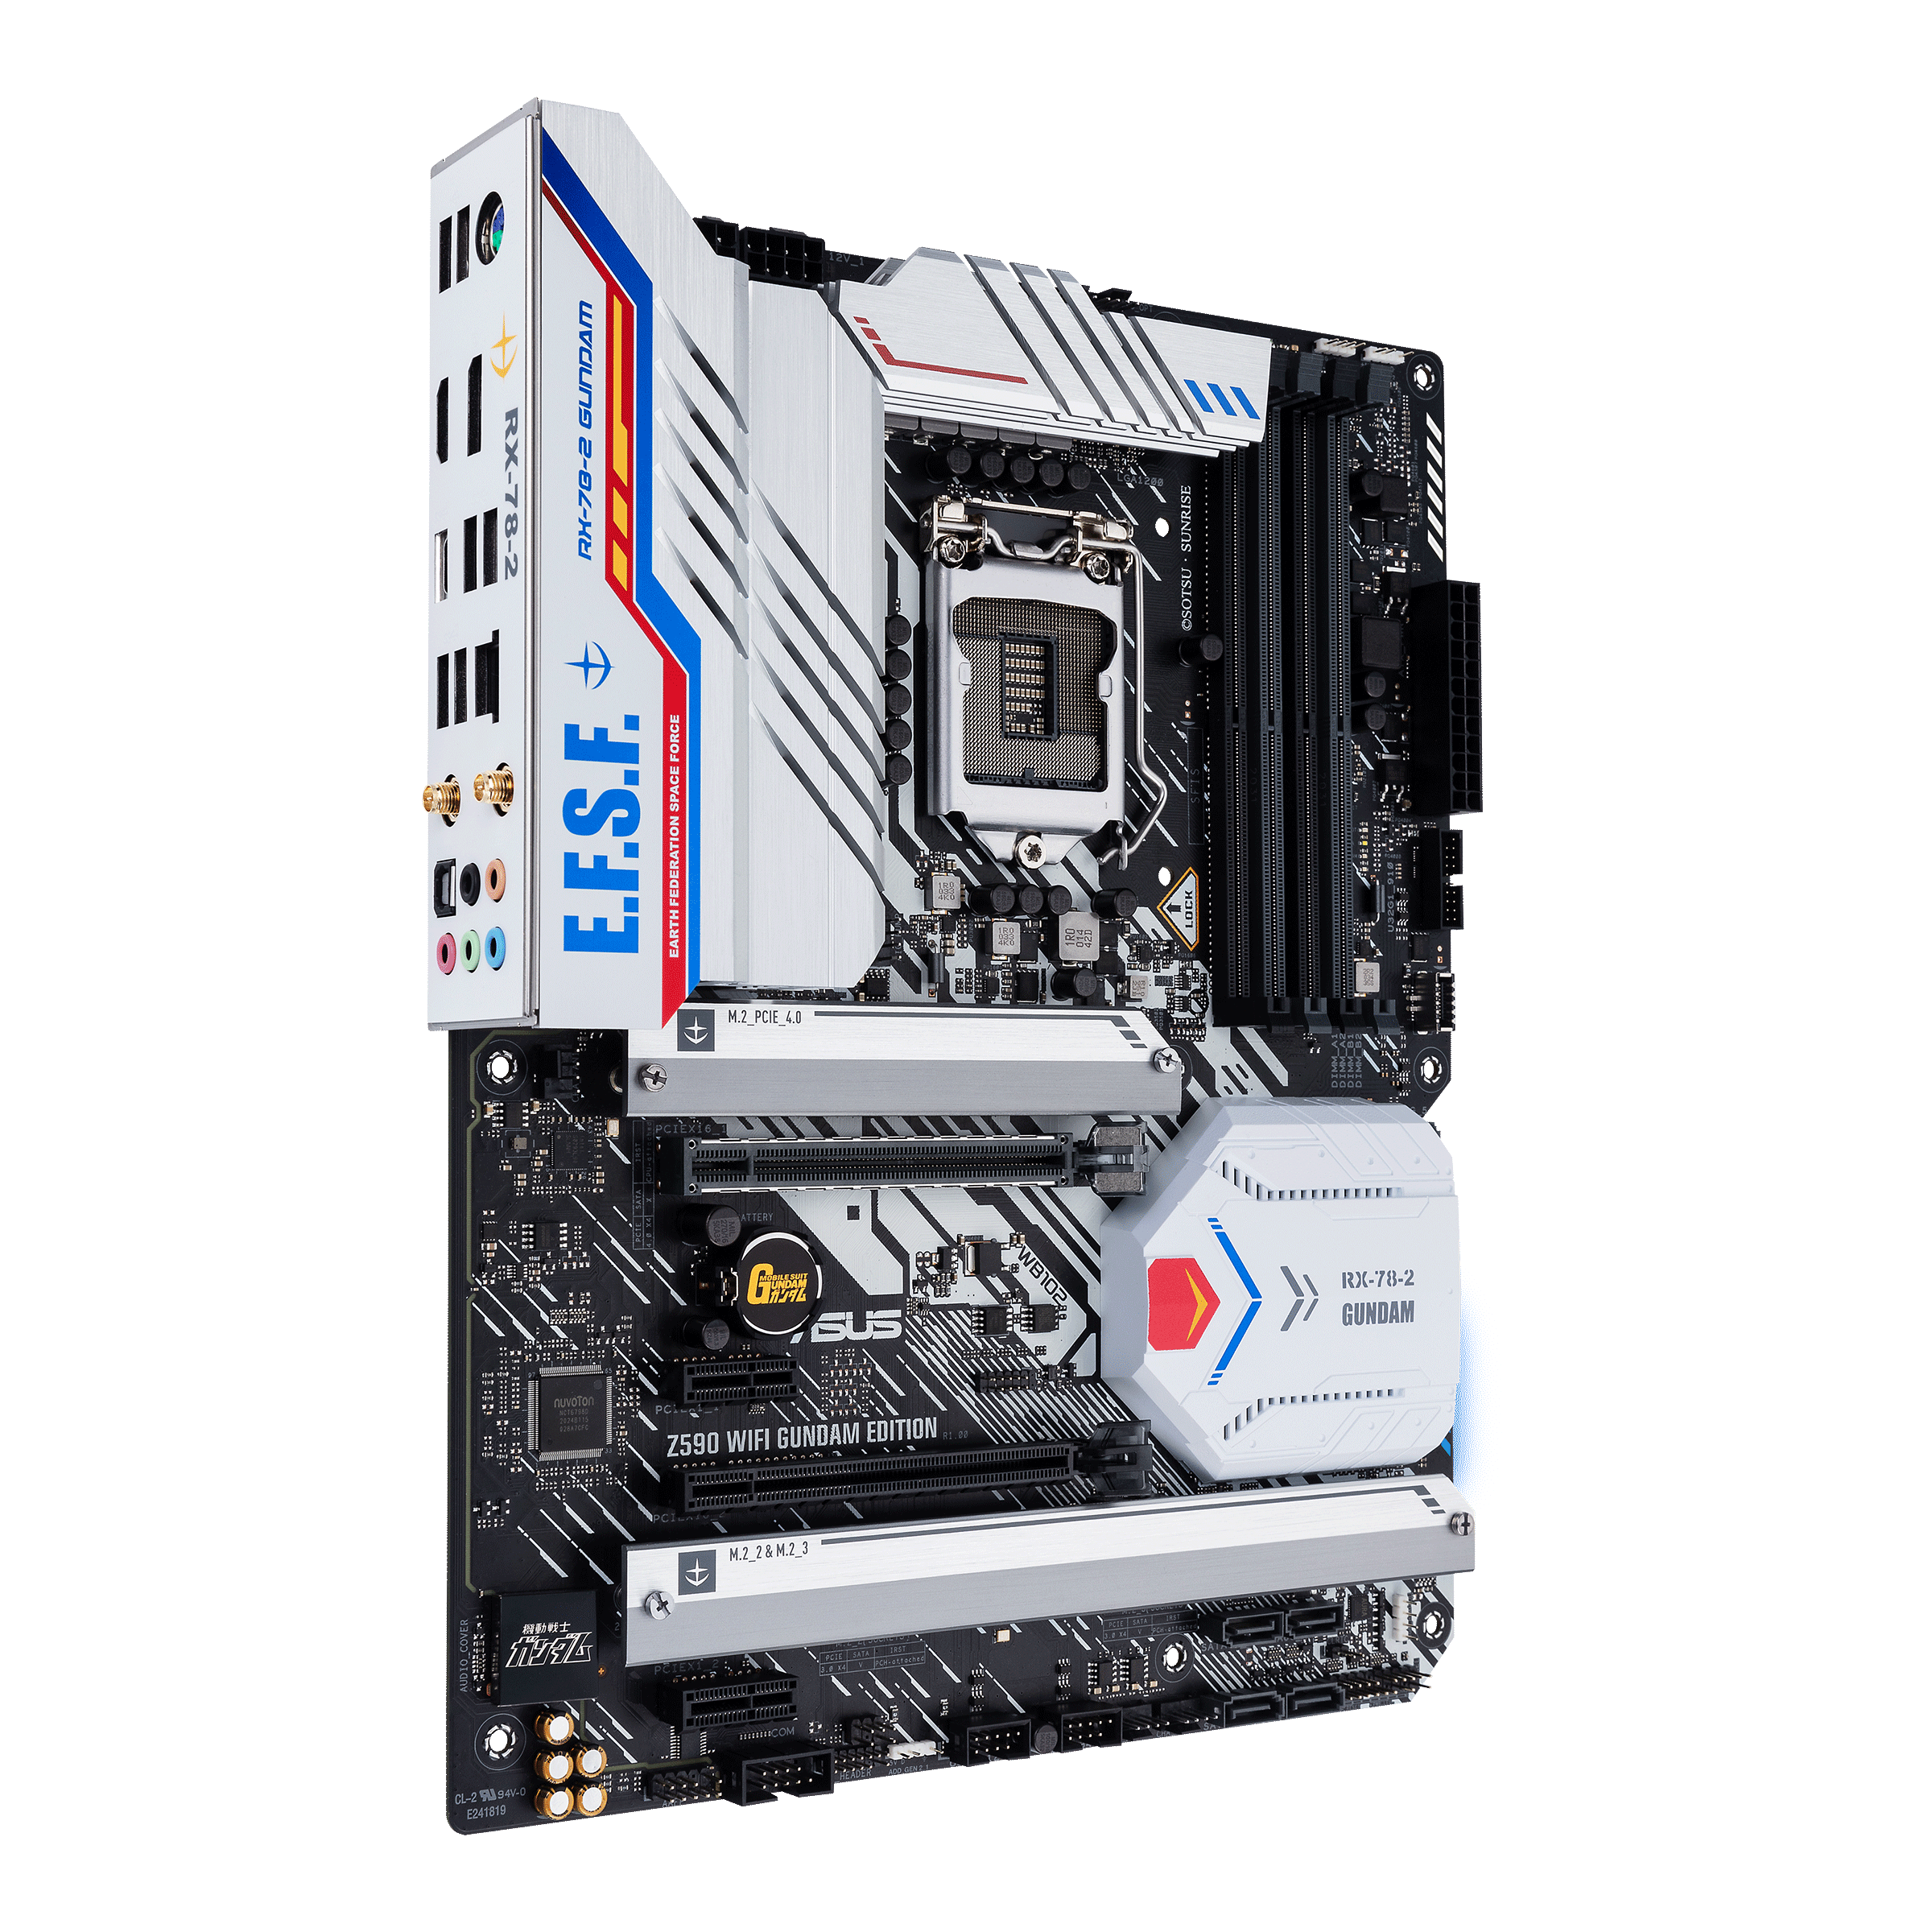 Z590 WIFI GUNDAM EDITION｜Motherboards｜ASUS USA